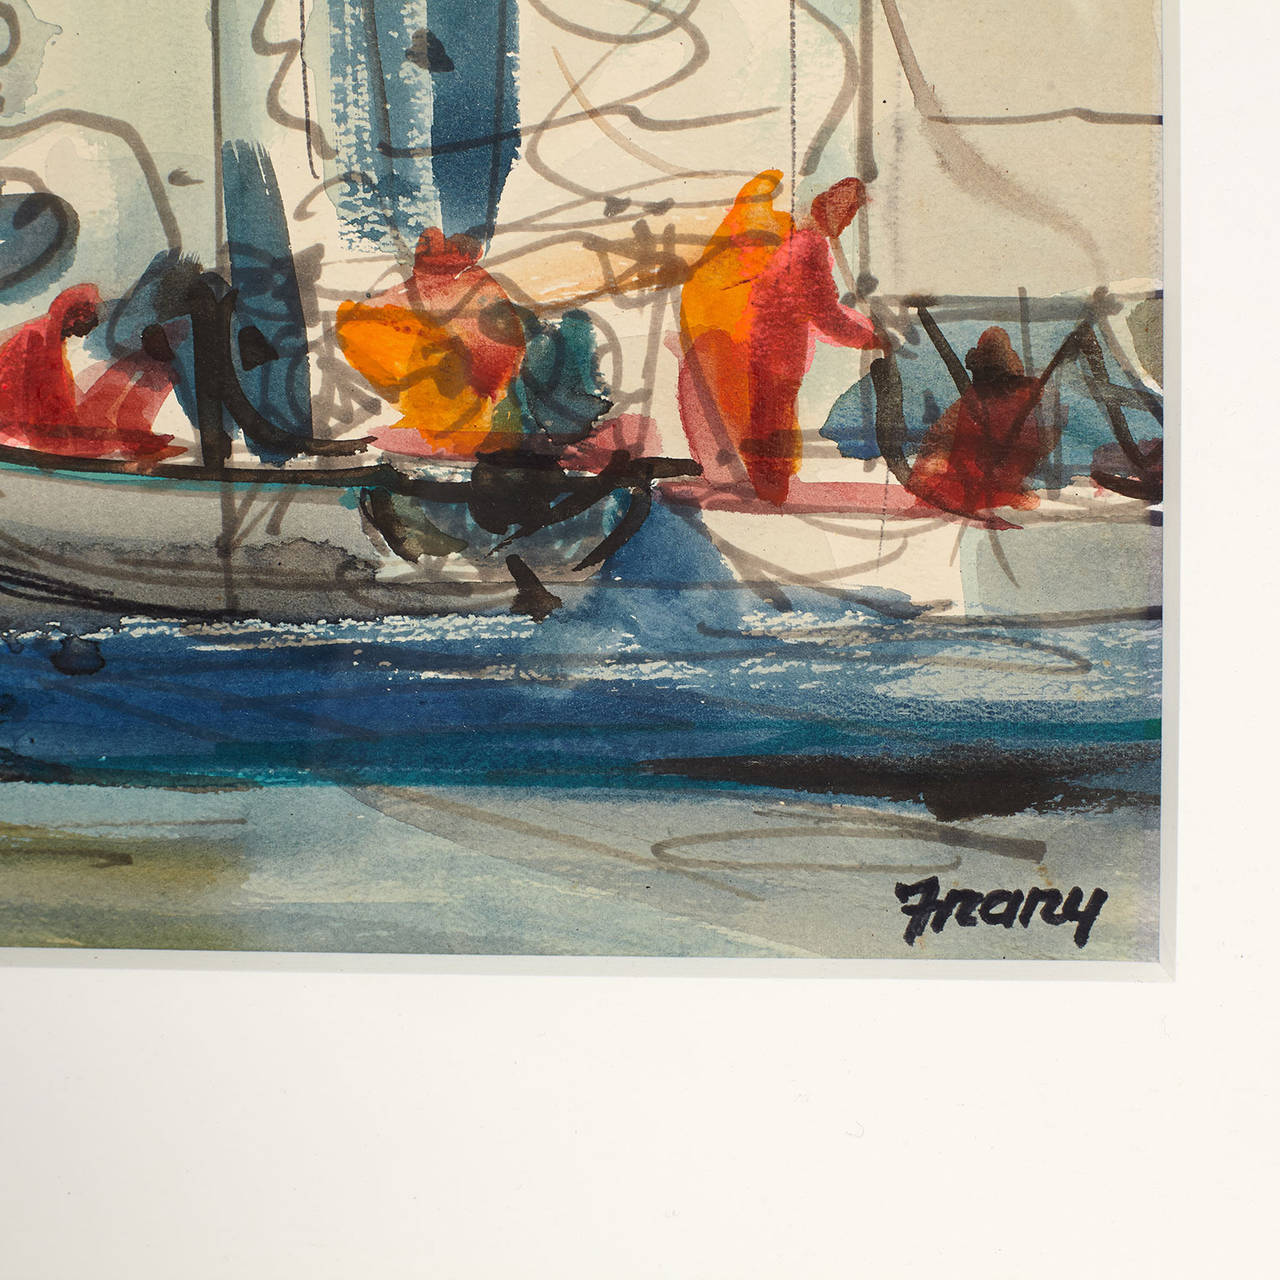 Nautical watercolor of yacht races at sea by Michael Frary.  Signed to lower right.  American, 2nd half of 20th century. Article included. Newly reframed.